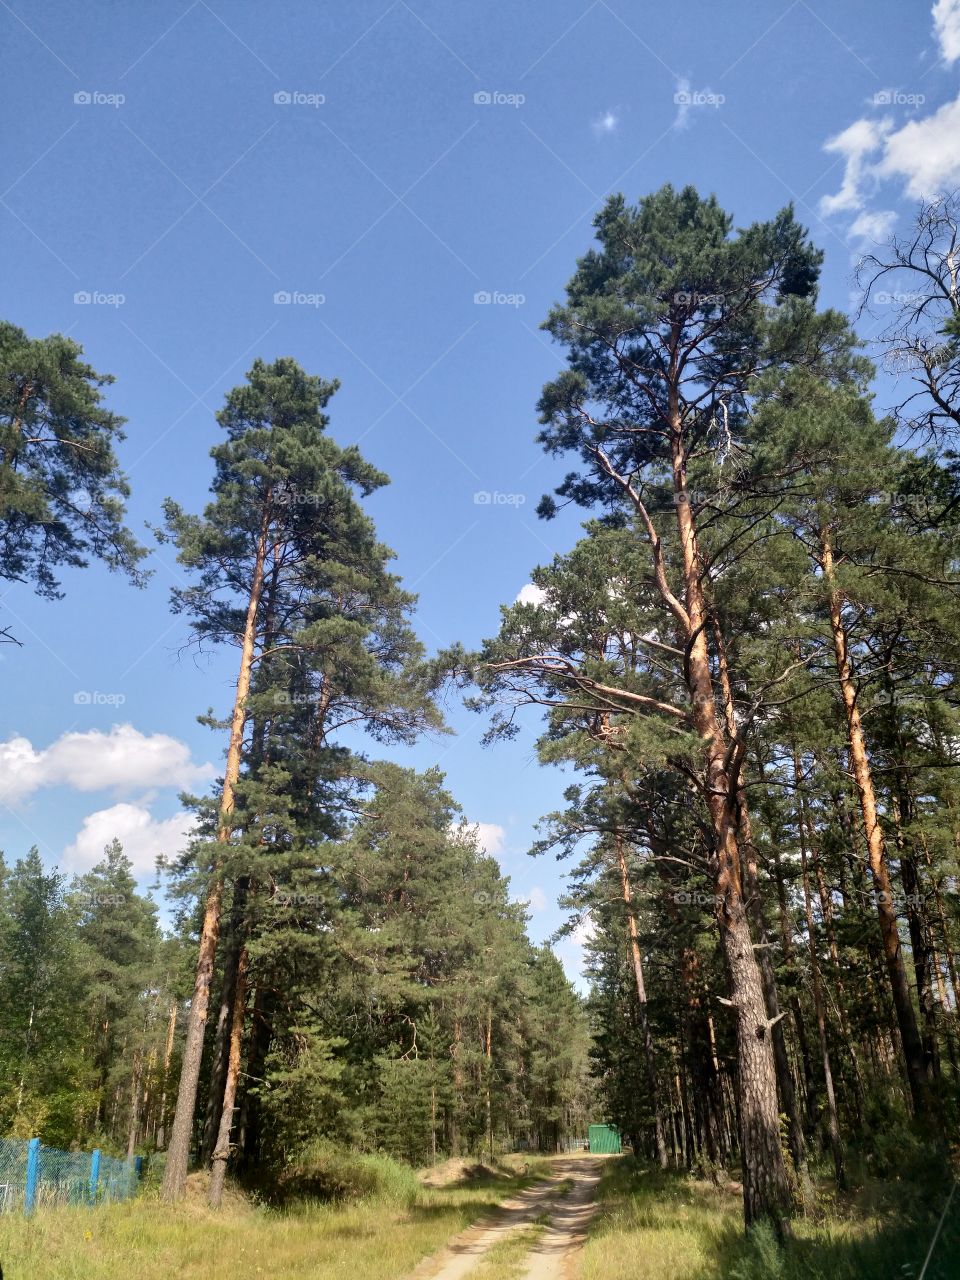 forest, trees, pines